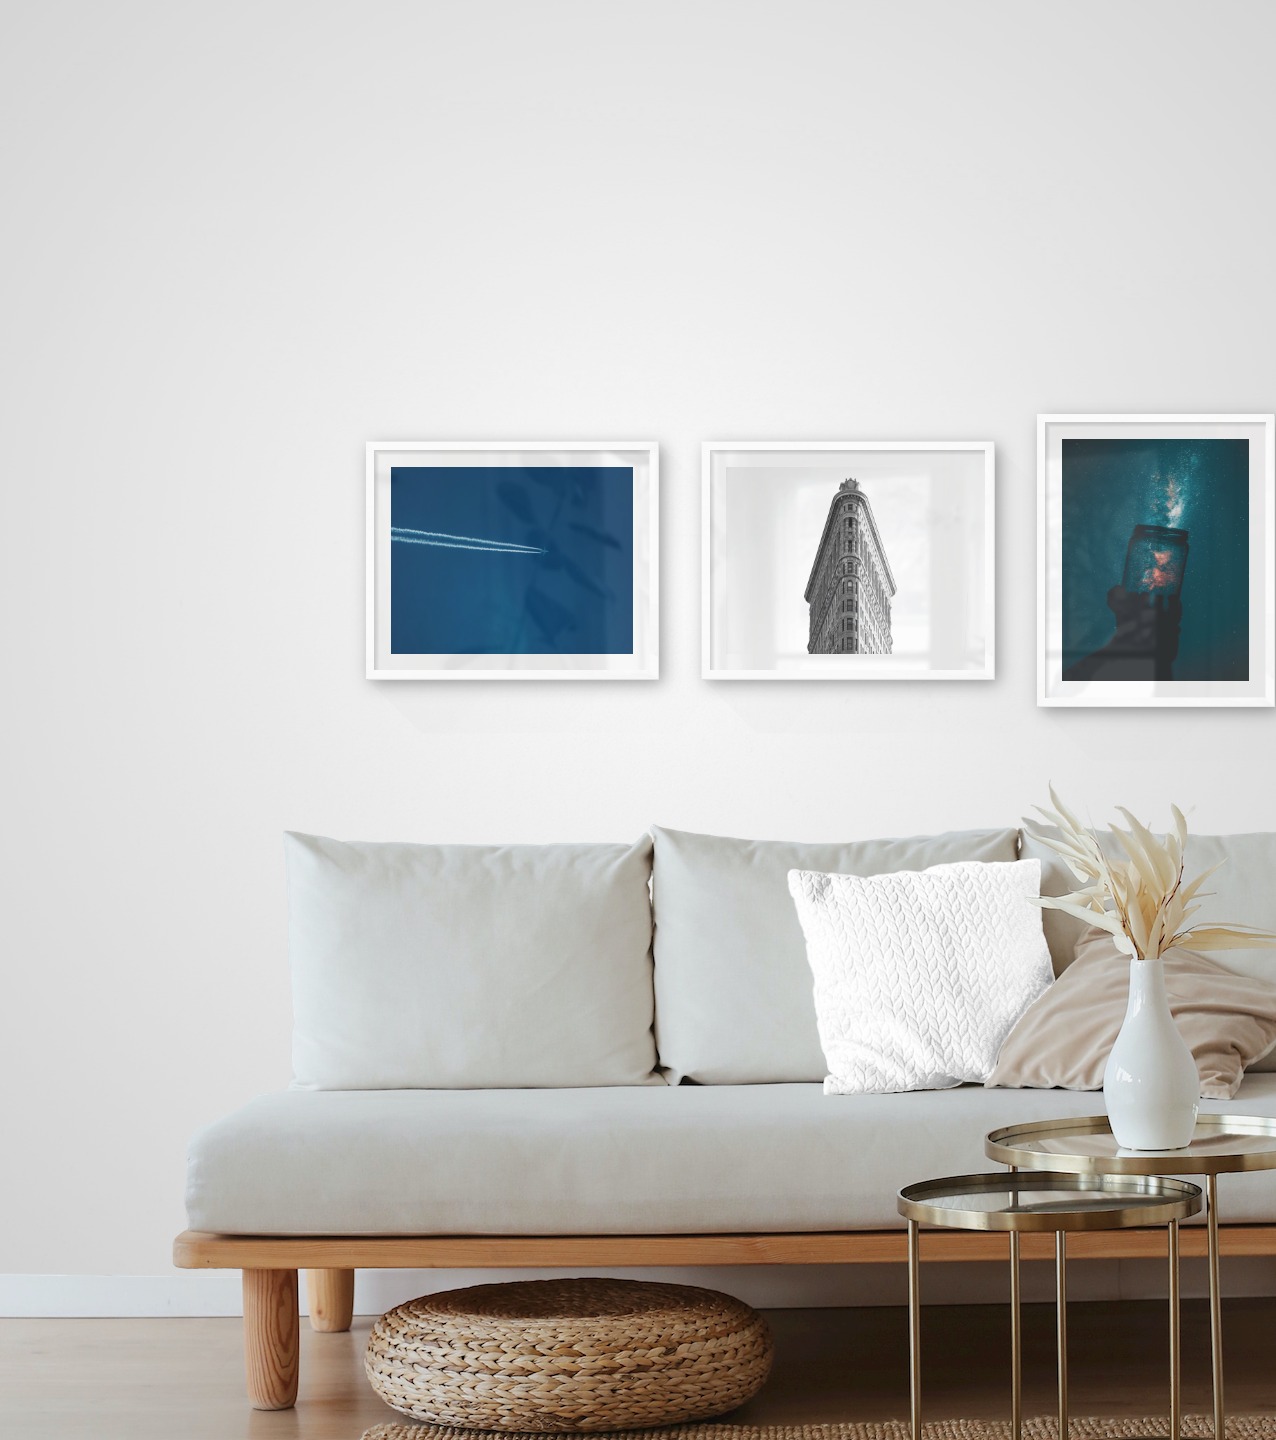 Gallery wall with picture frames in white in sizes 40x50 with prints "Airplanes in the air", "Triangular building" and "Jar in front of space"